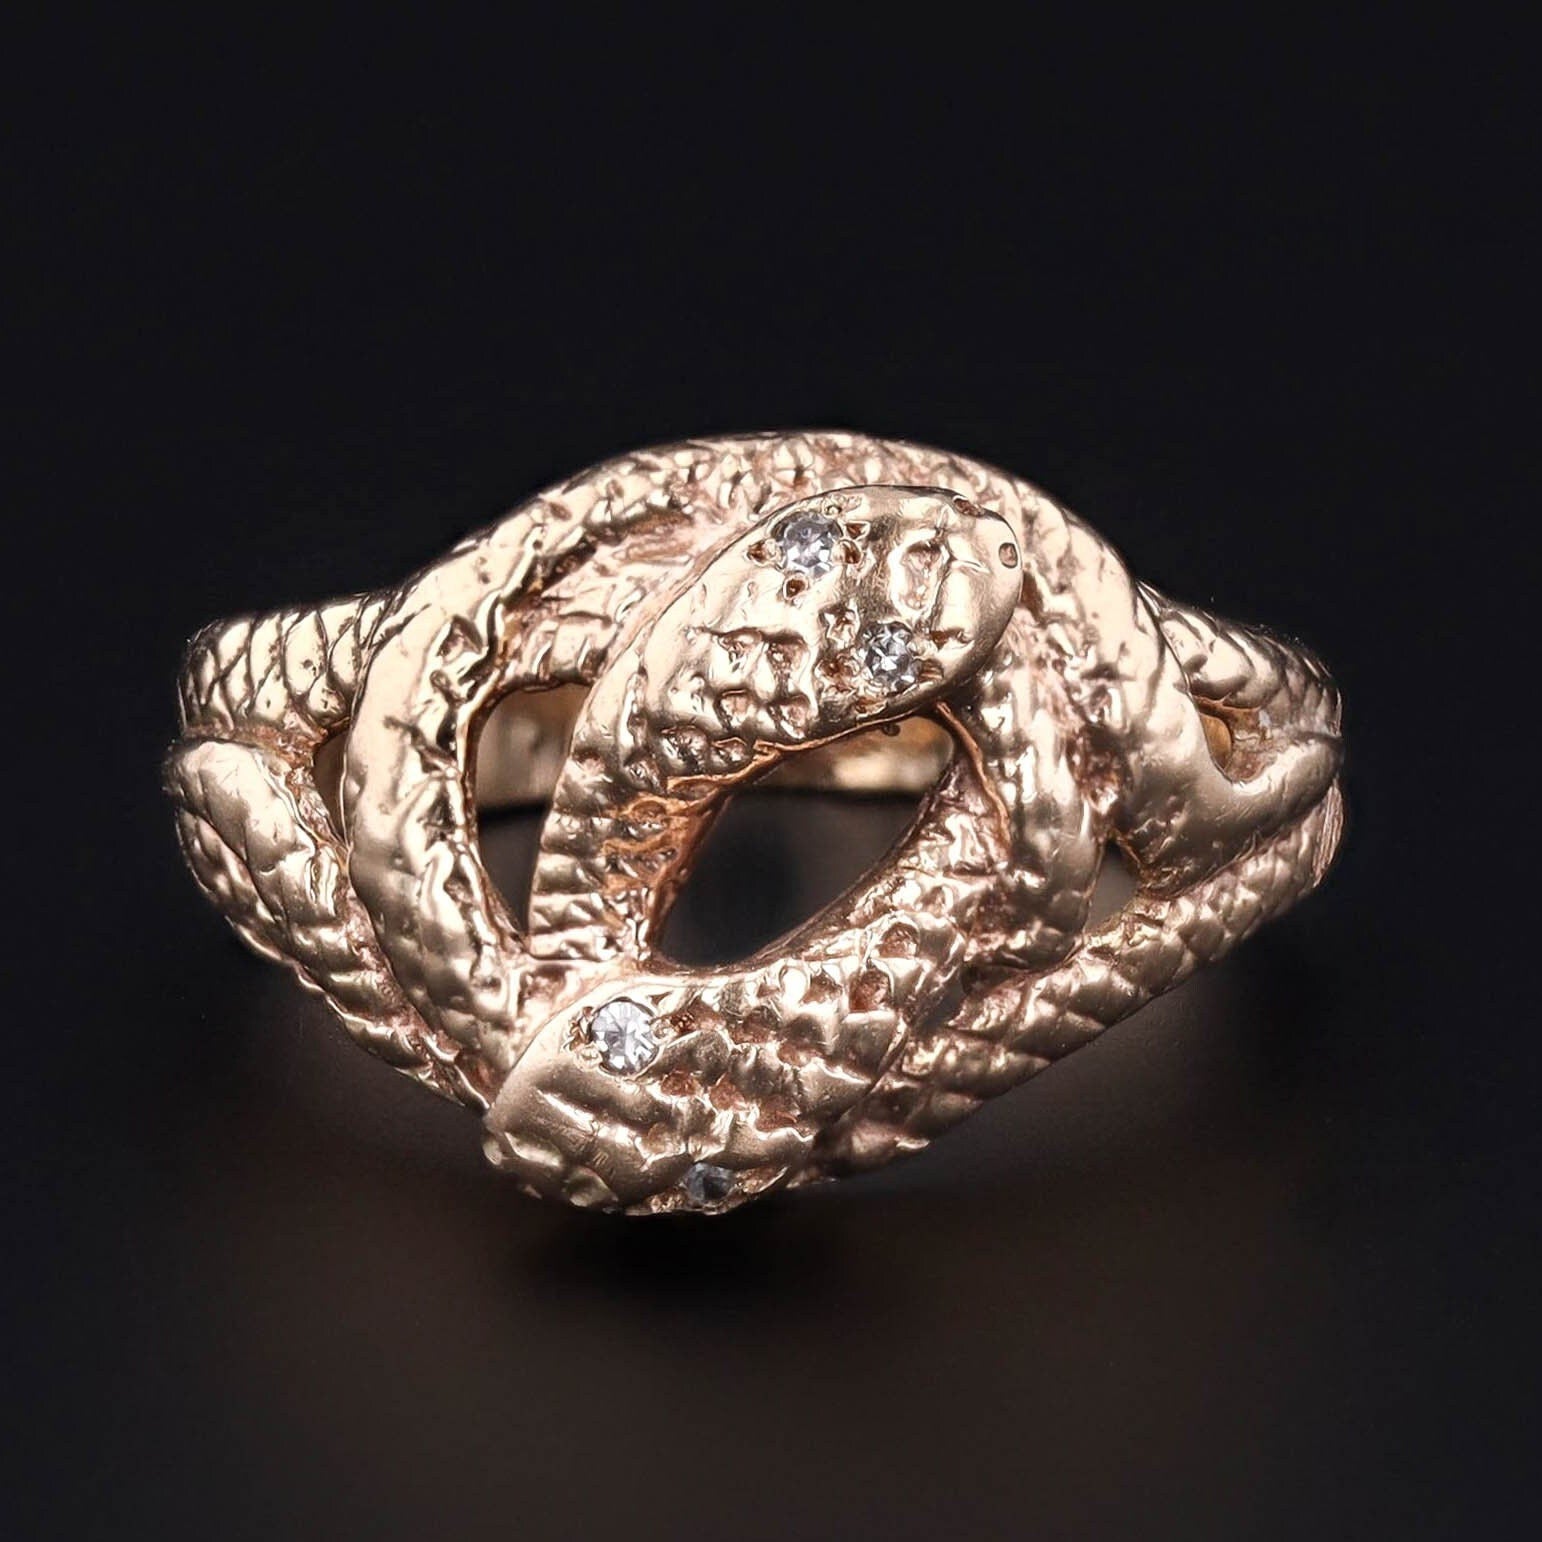 Vintage Entwined Snakes Ring of 10k Gold